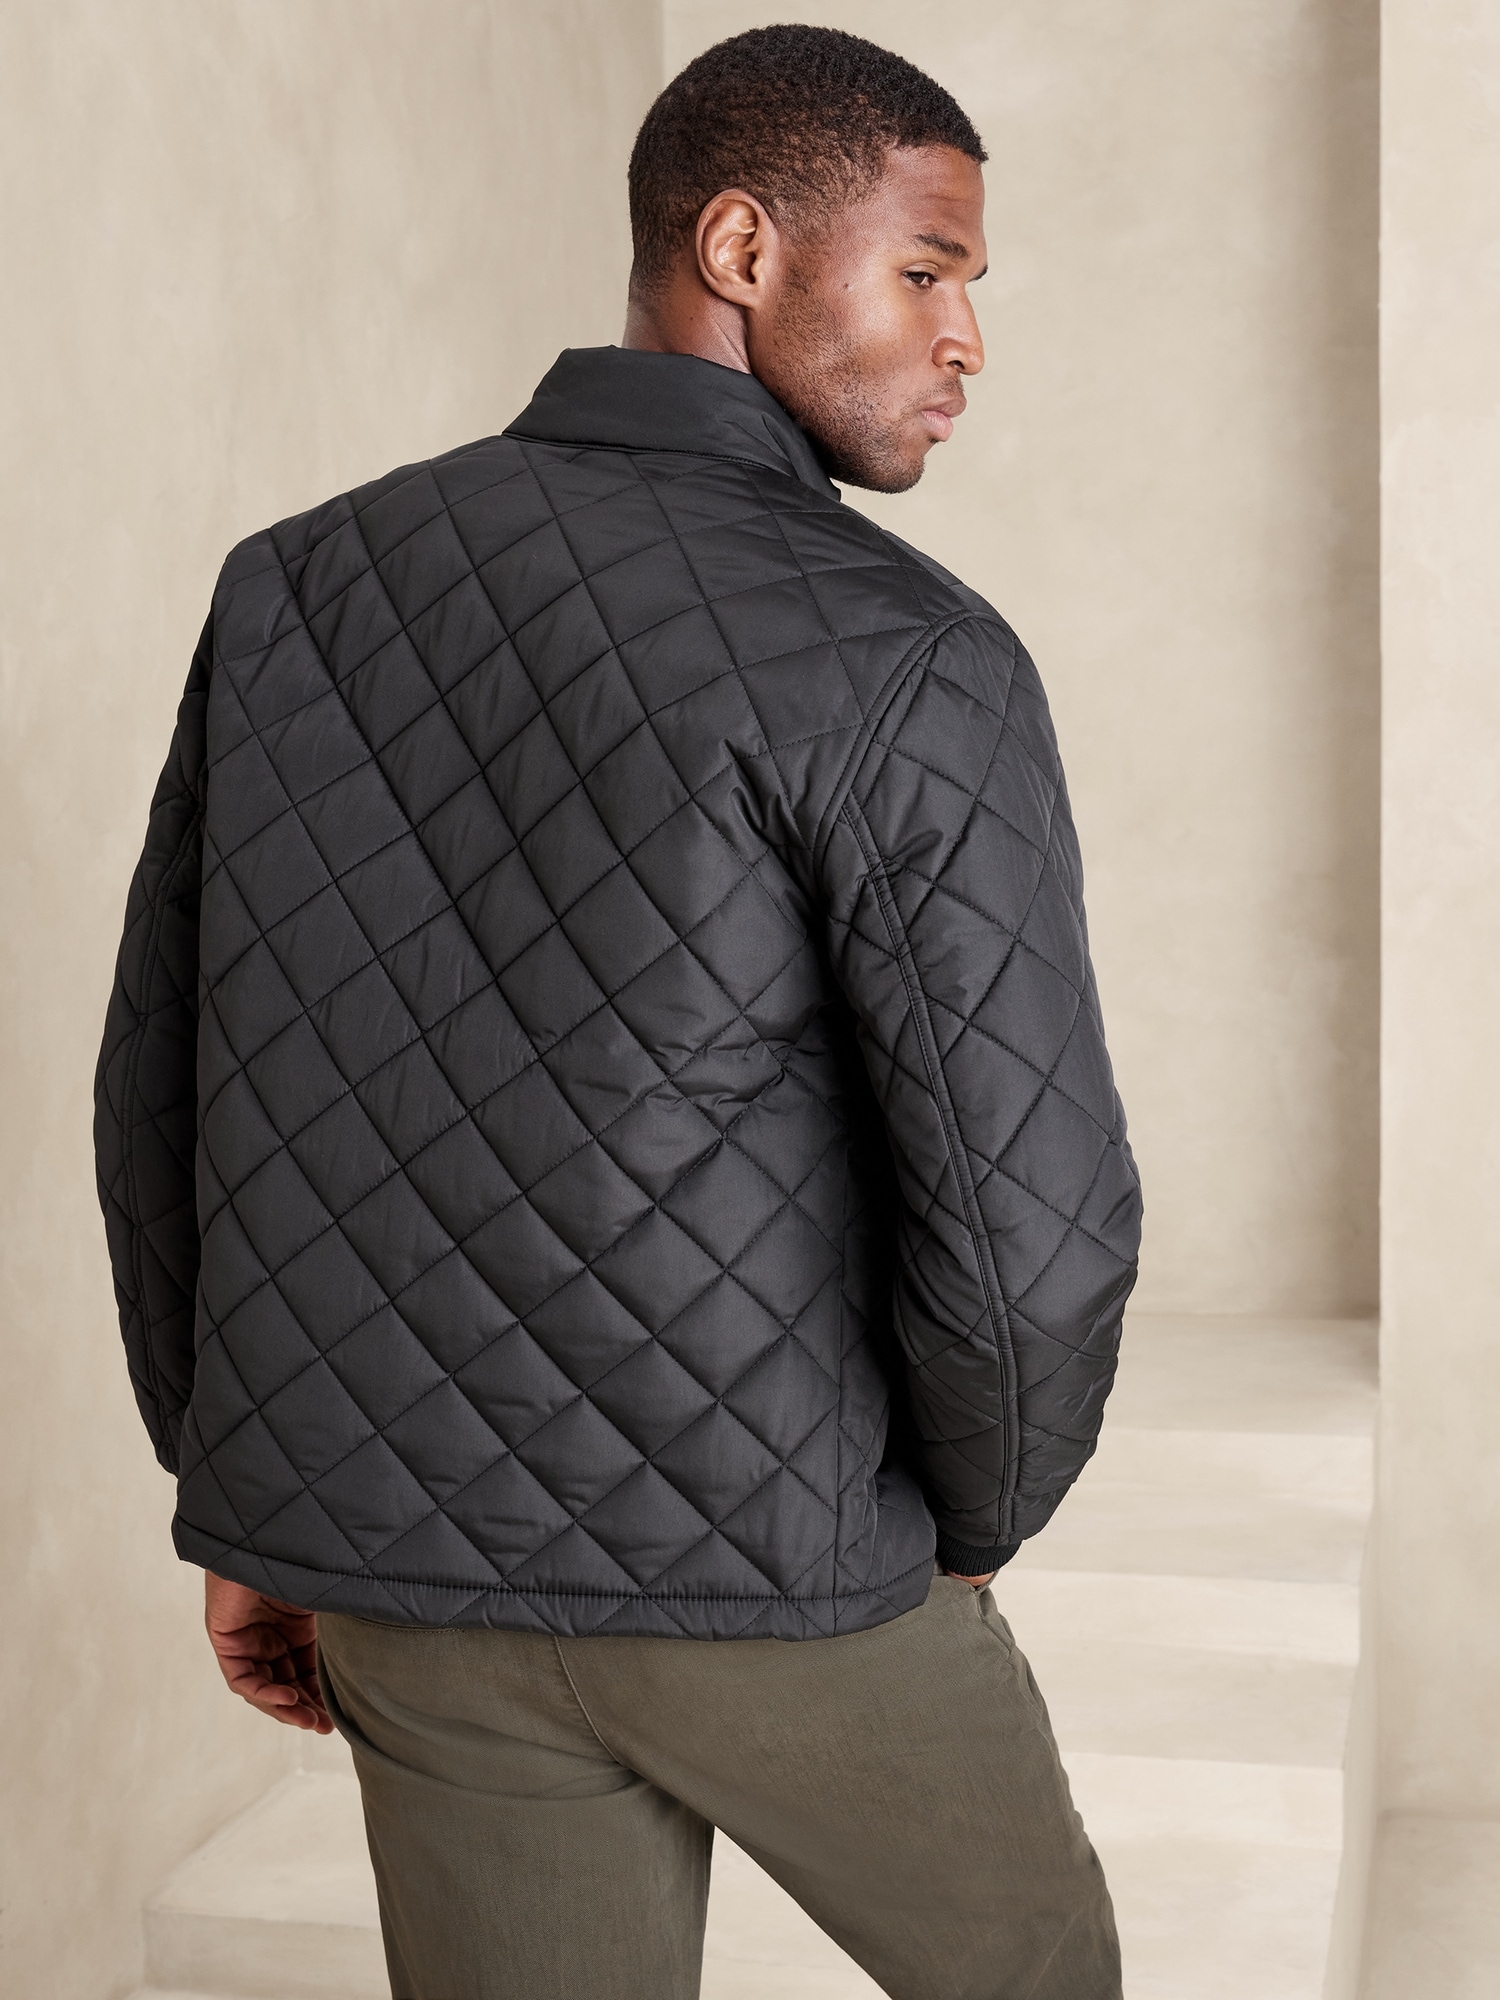 Diamond Quilted Jacket | Banana Republic Factory